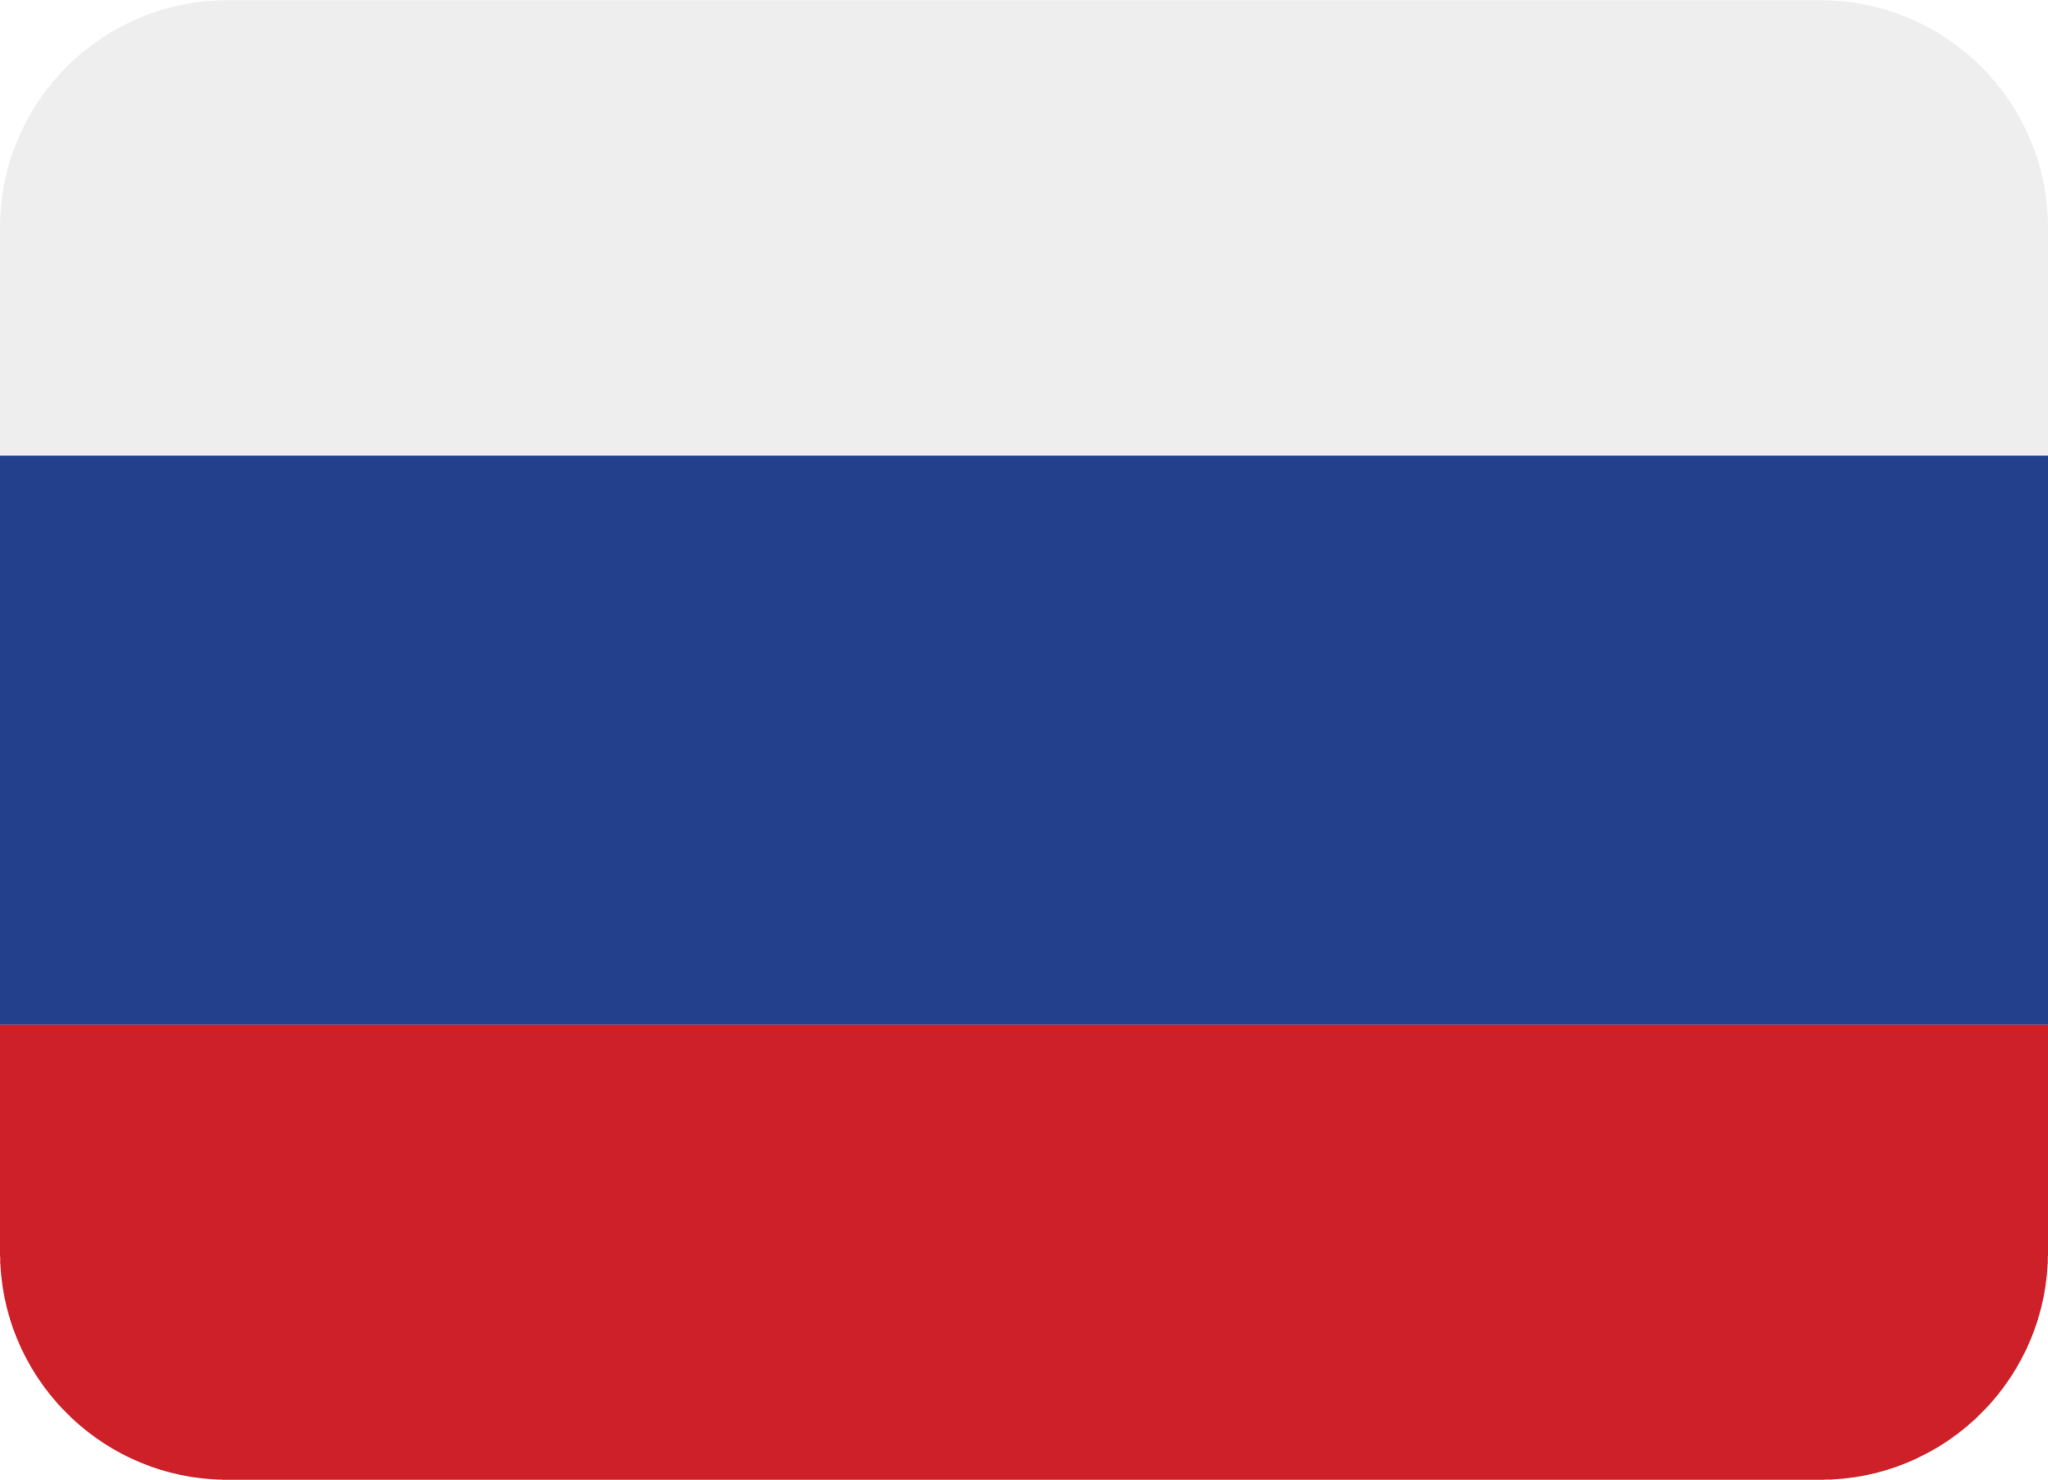 Russia emoji icon in PNG, SVG